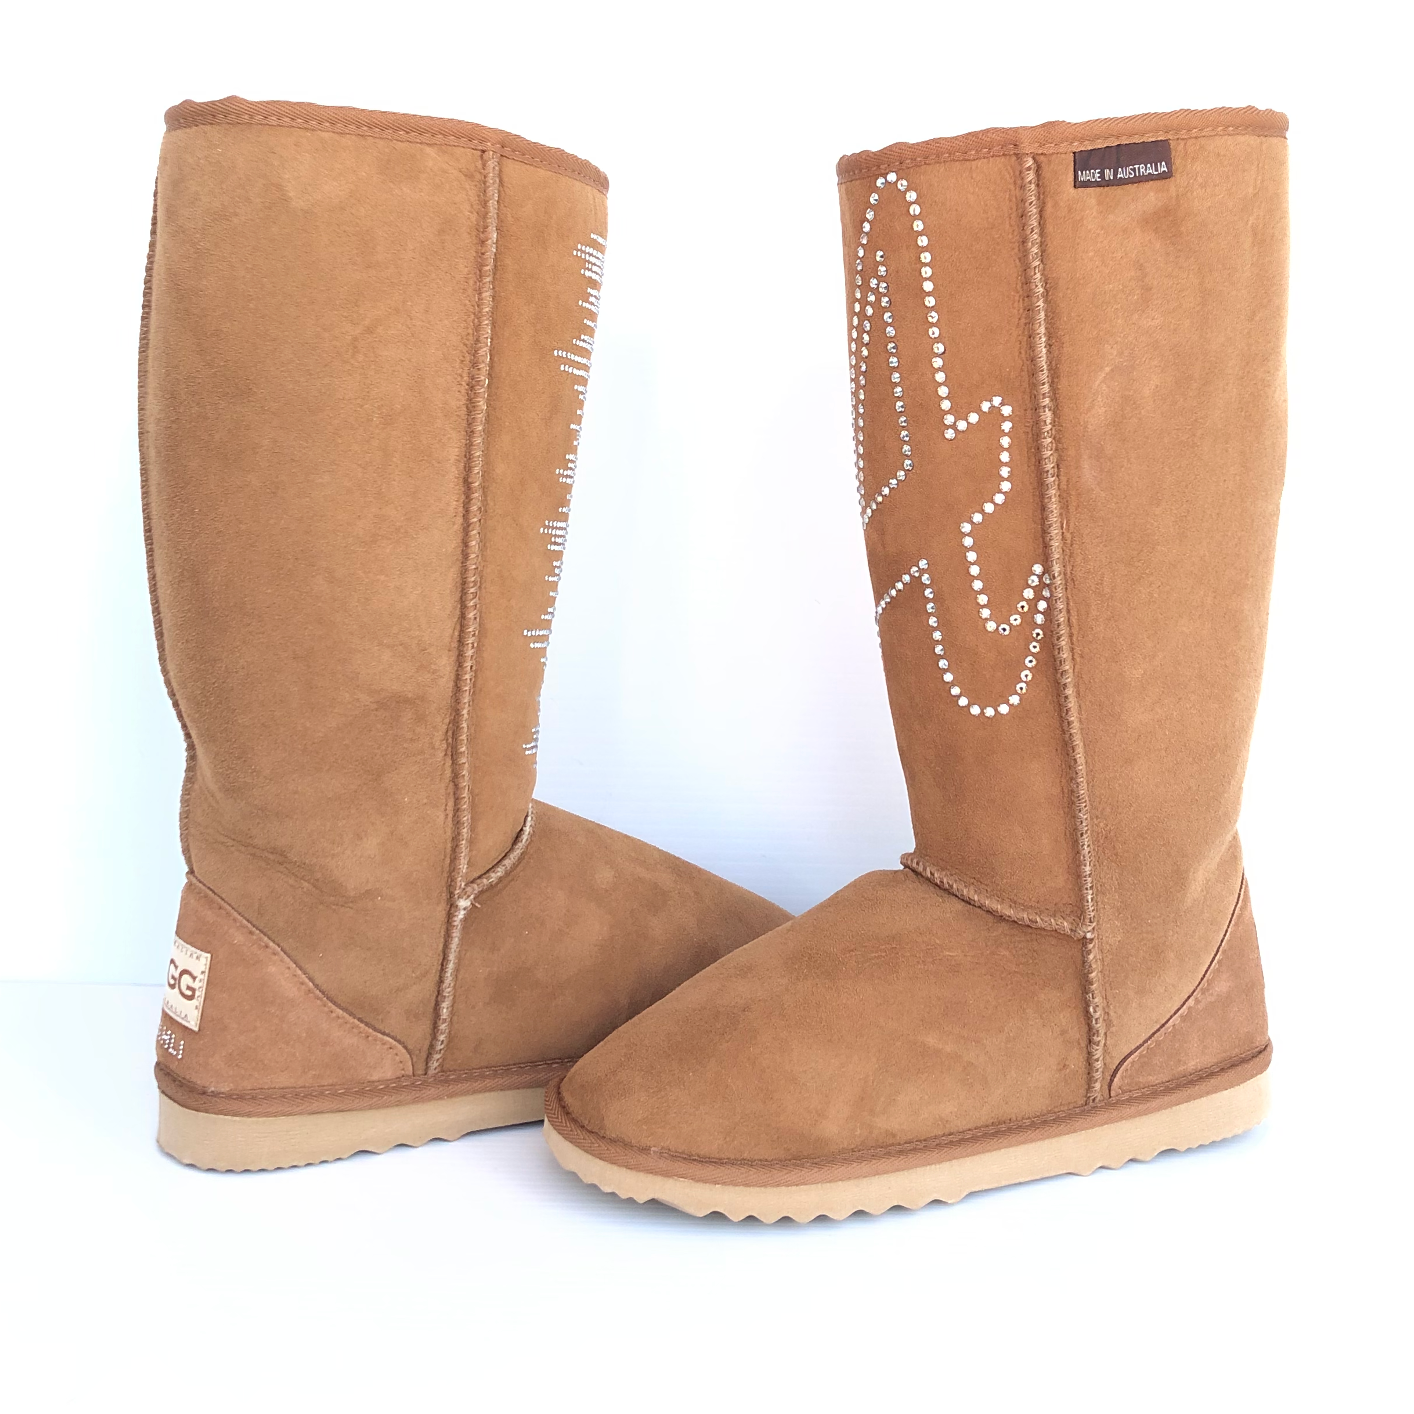 CLEARANCE CLASSIC TALL BOOTS CHESTNUT (with Swarovski design) - AU WOMEN'S 7 | MEN'S 6